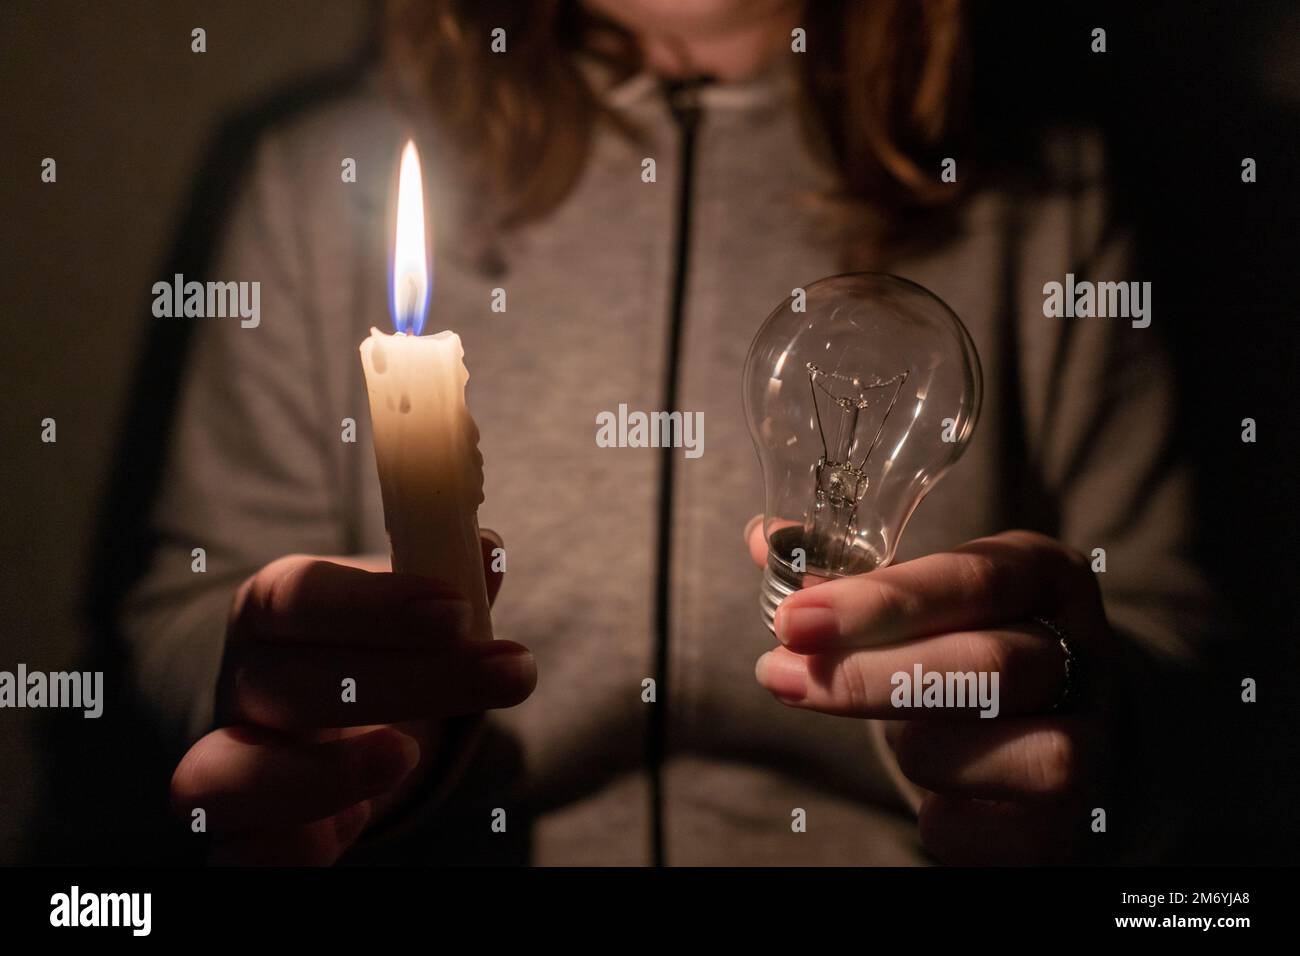 https://c8.alamy.com/comp/2M6YJA8/girl-holds-an-electric-light-bulb-and-a-burning-candle-in-her-hands-blackout-destruction-of-infrastructure-energy-crisis-power-outage-concept-2M6YJA8.jpg